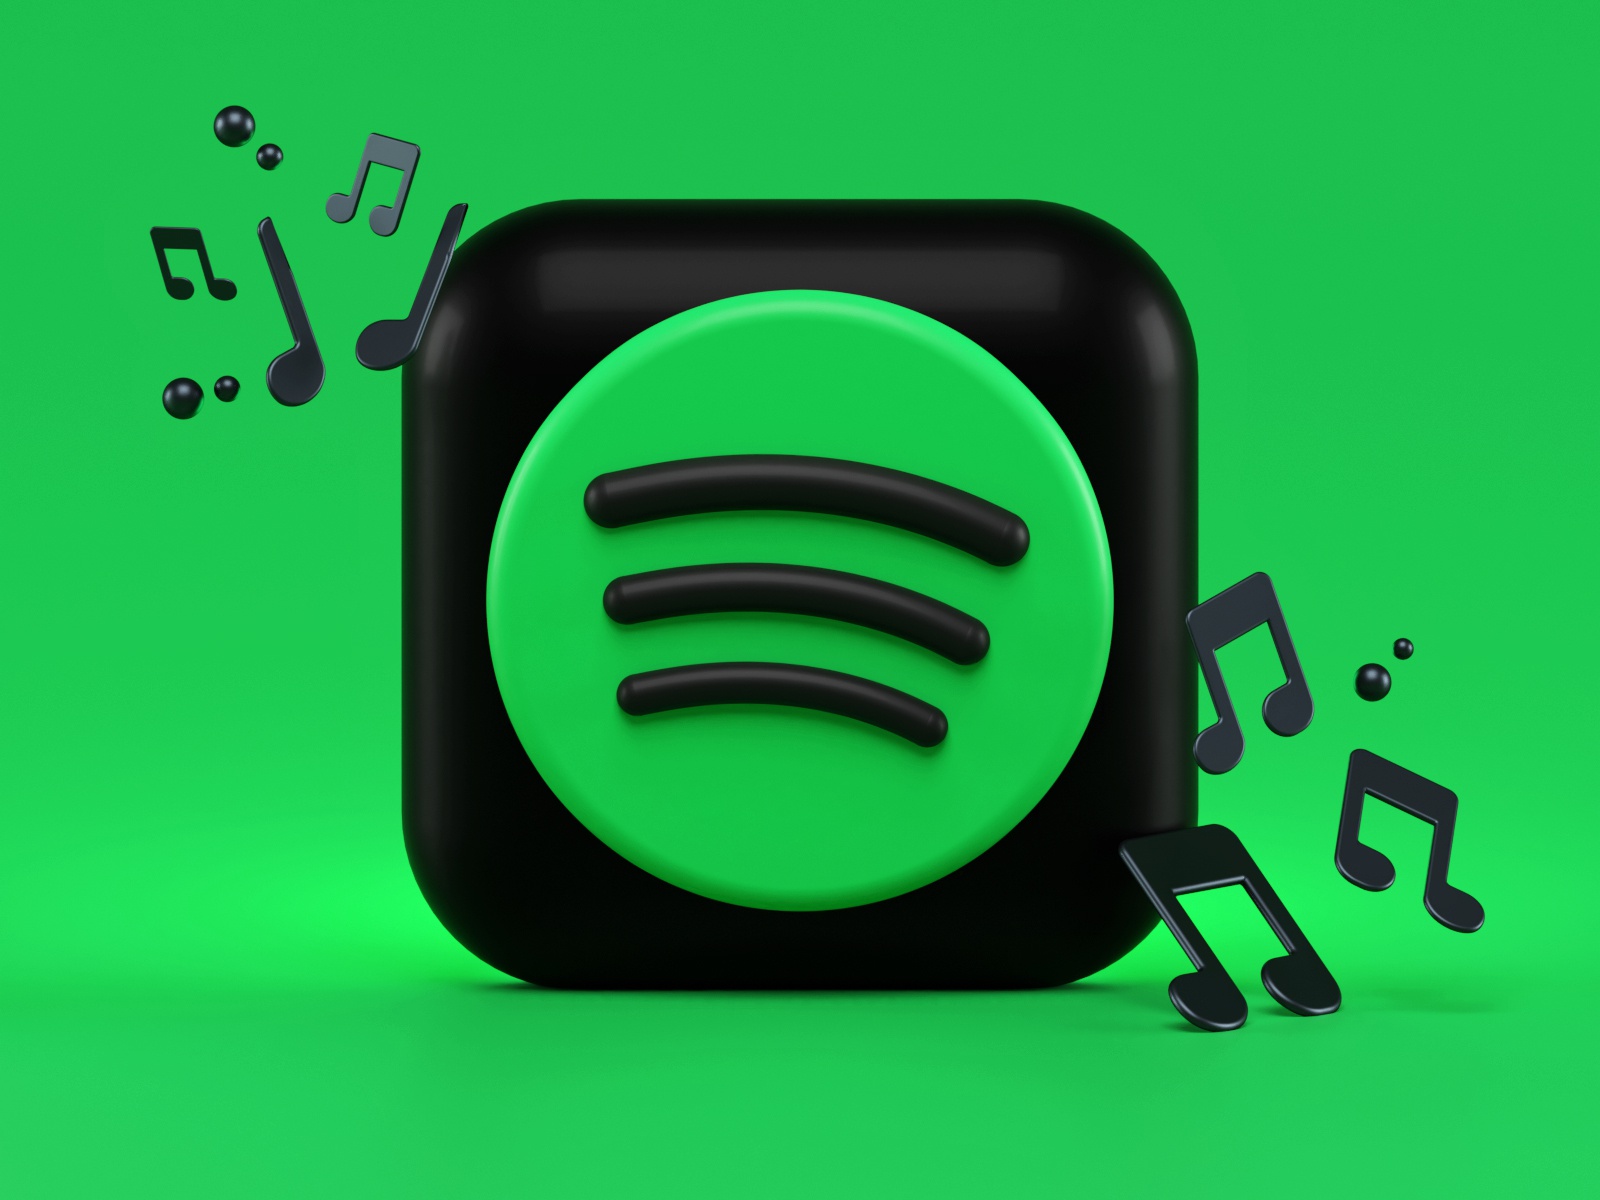 Spotify Kills its Car View Mode, and Users are not Happy